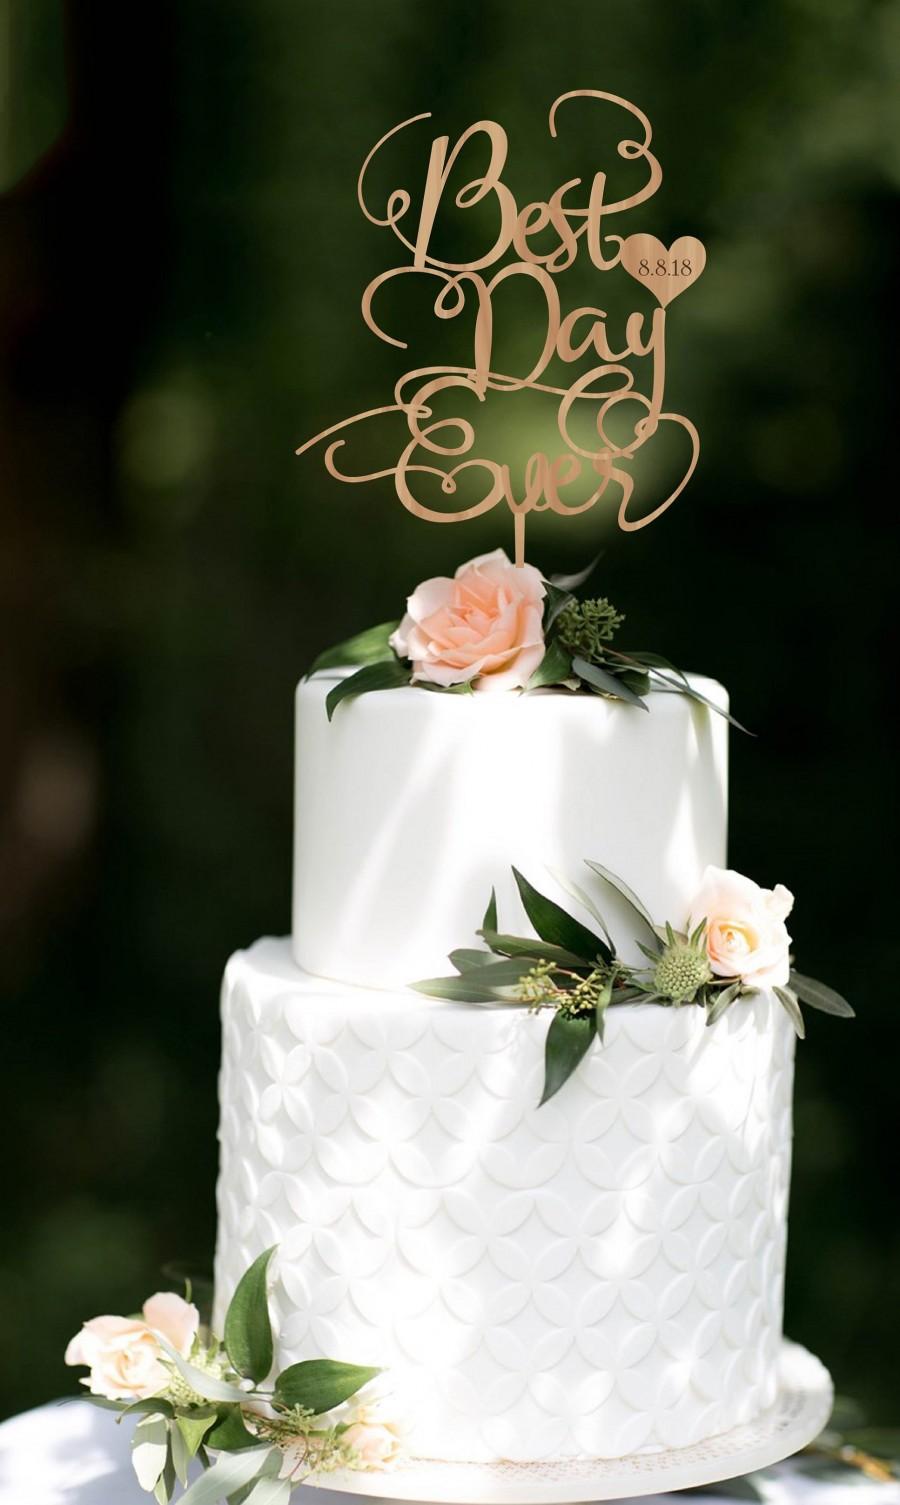 Wedding - Wedding Cake Topper Best Day Ever Personalized Wood Cake Topper Golden Silver  Cake Topper Customized Wedding Cake Topper